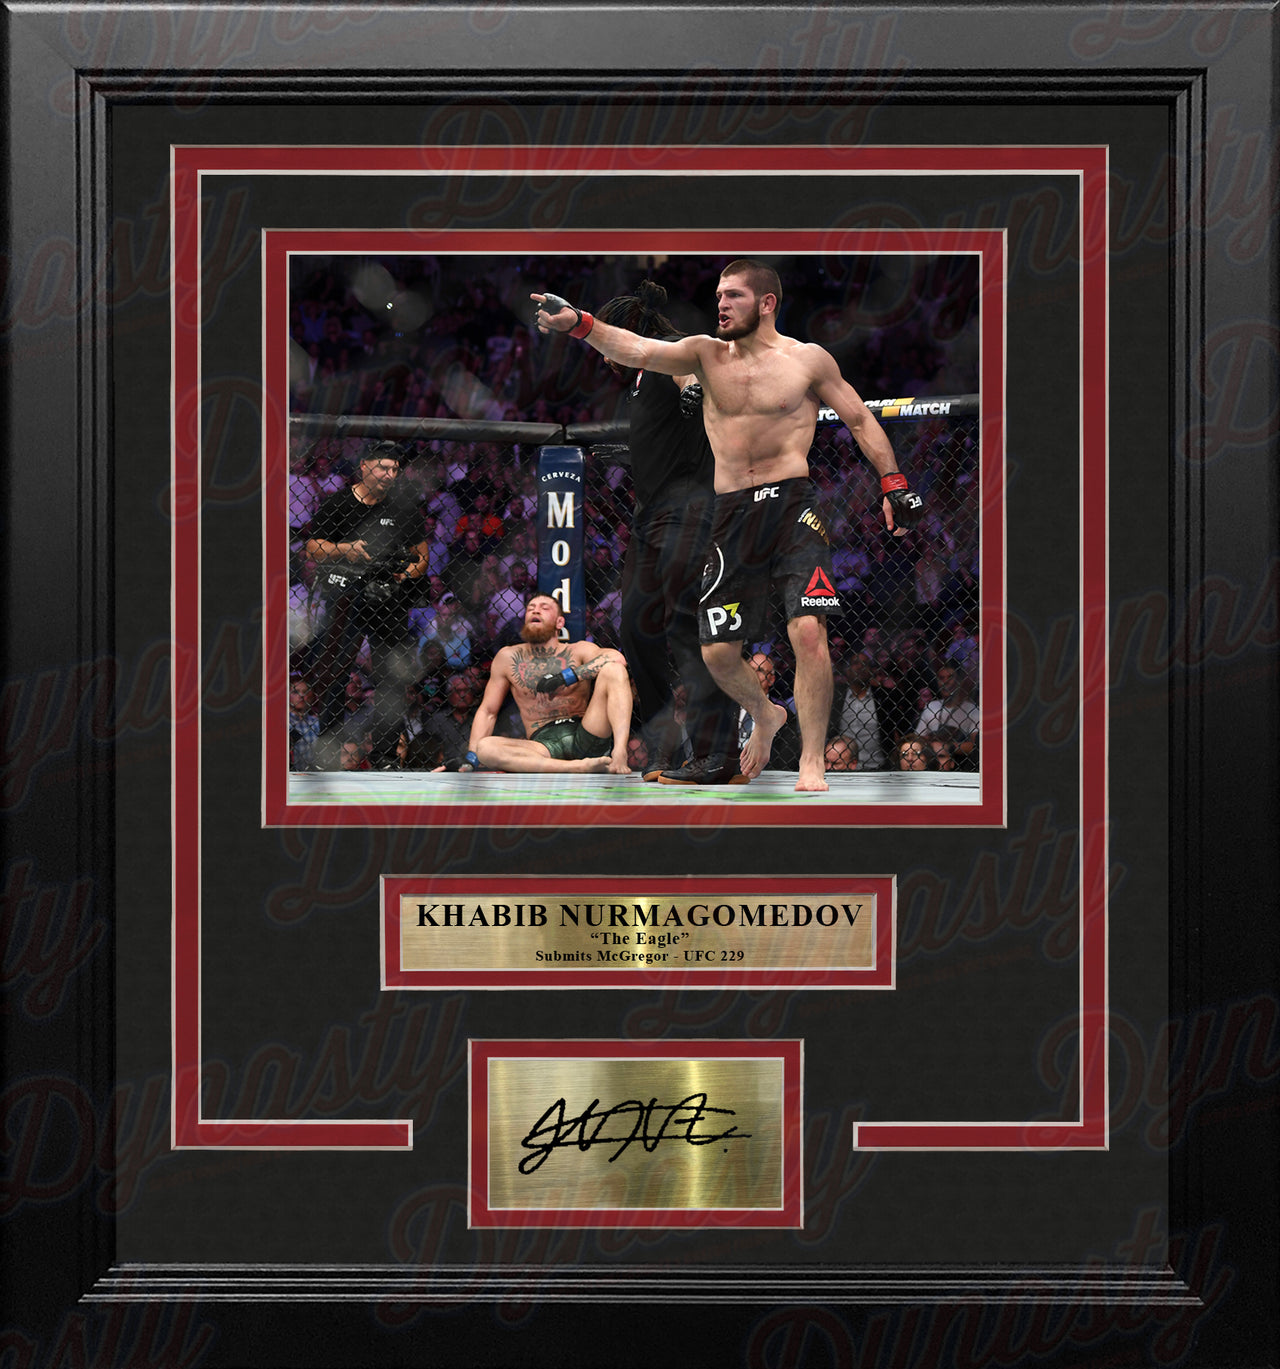 Khabib Nurmagomedov Crushes McGregor 8x10 Framed Mixed Martial Arts Photo with Engraved Autograph - Dynasty Sports & Framing 